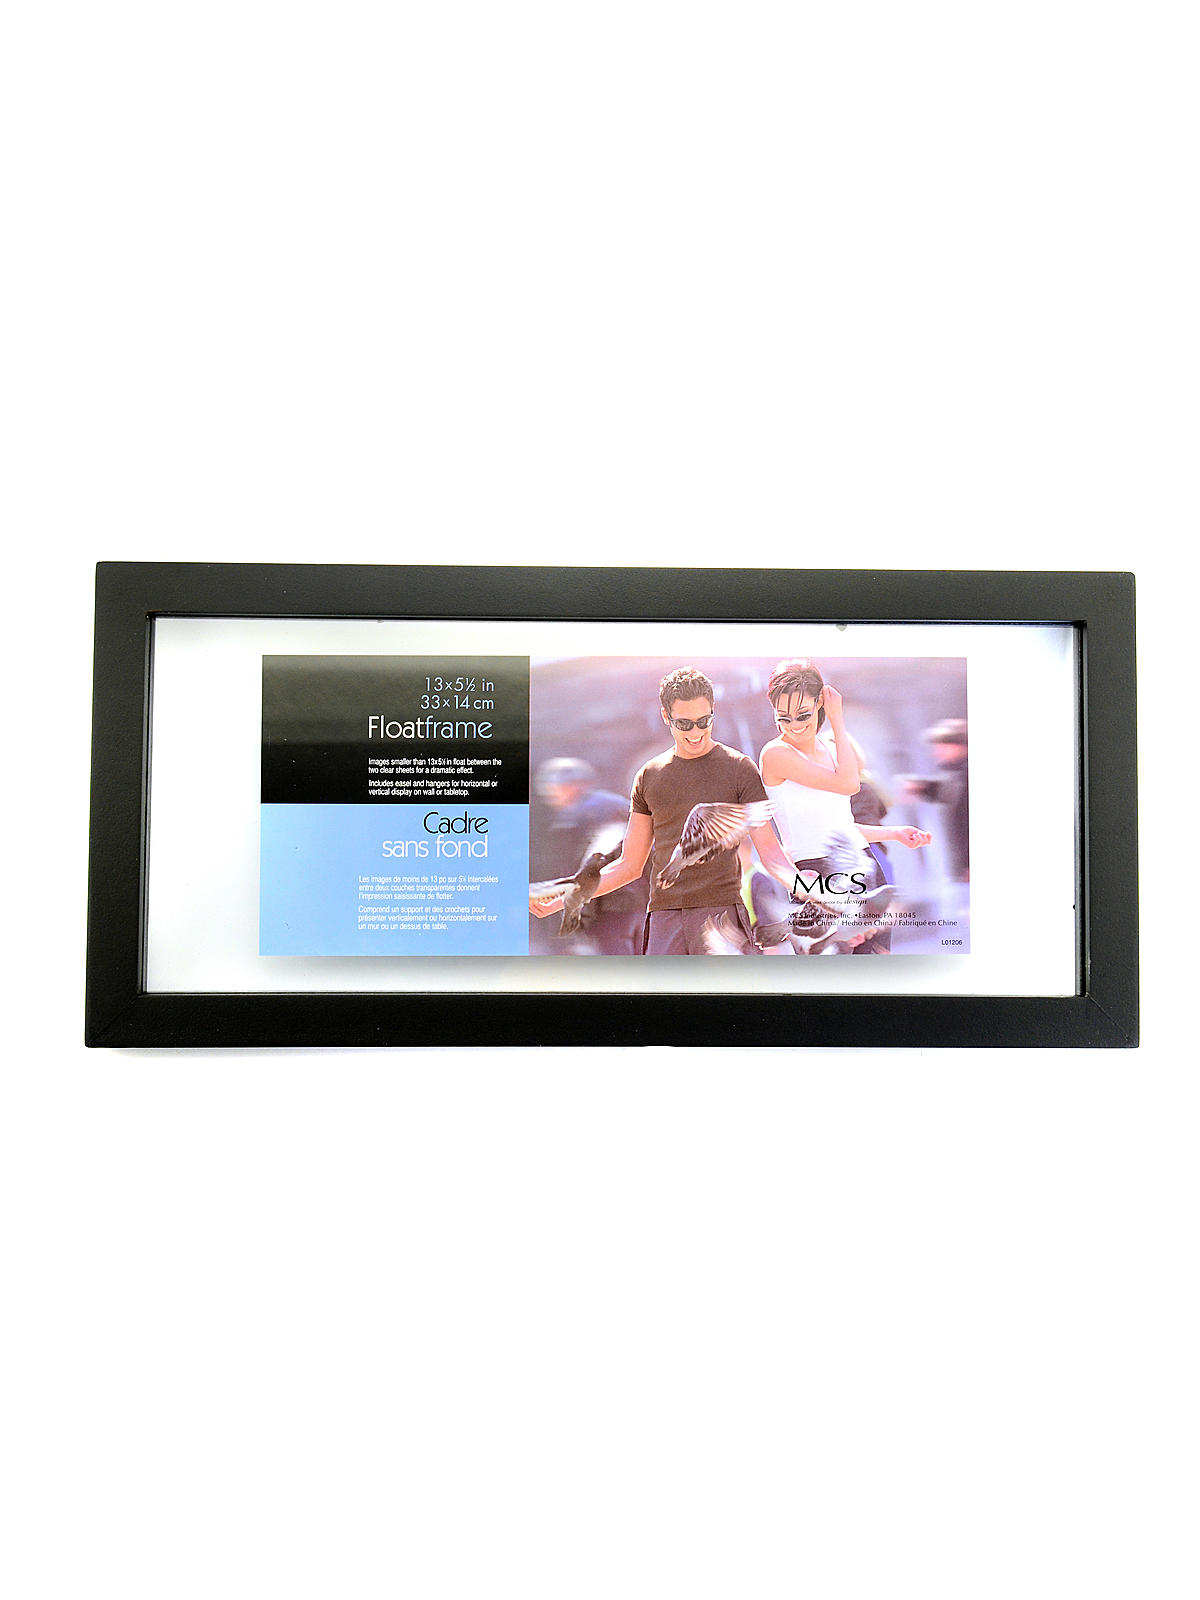 Solid Wood Float Frame Black 5 1 2 In. X 13 In.